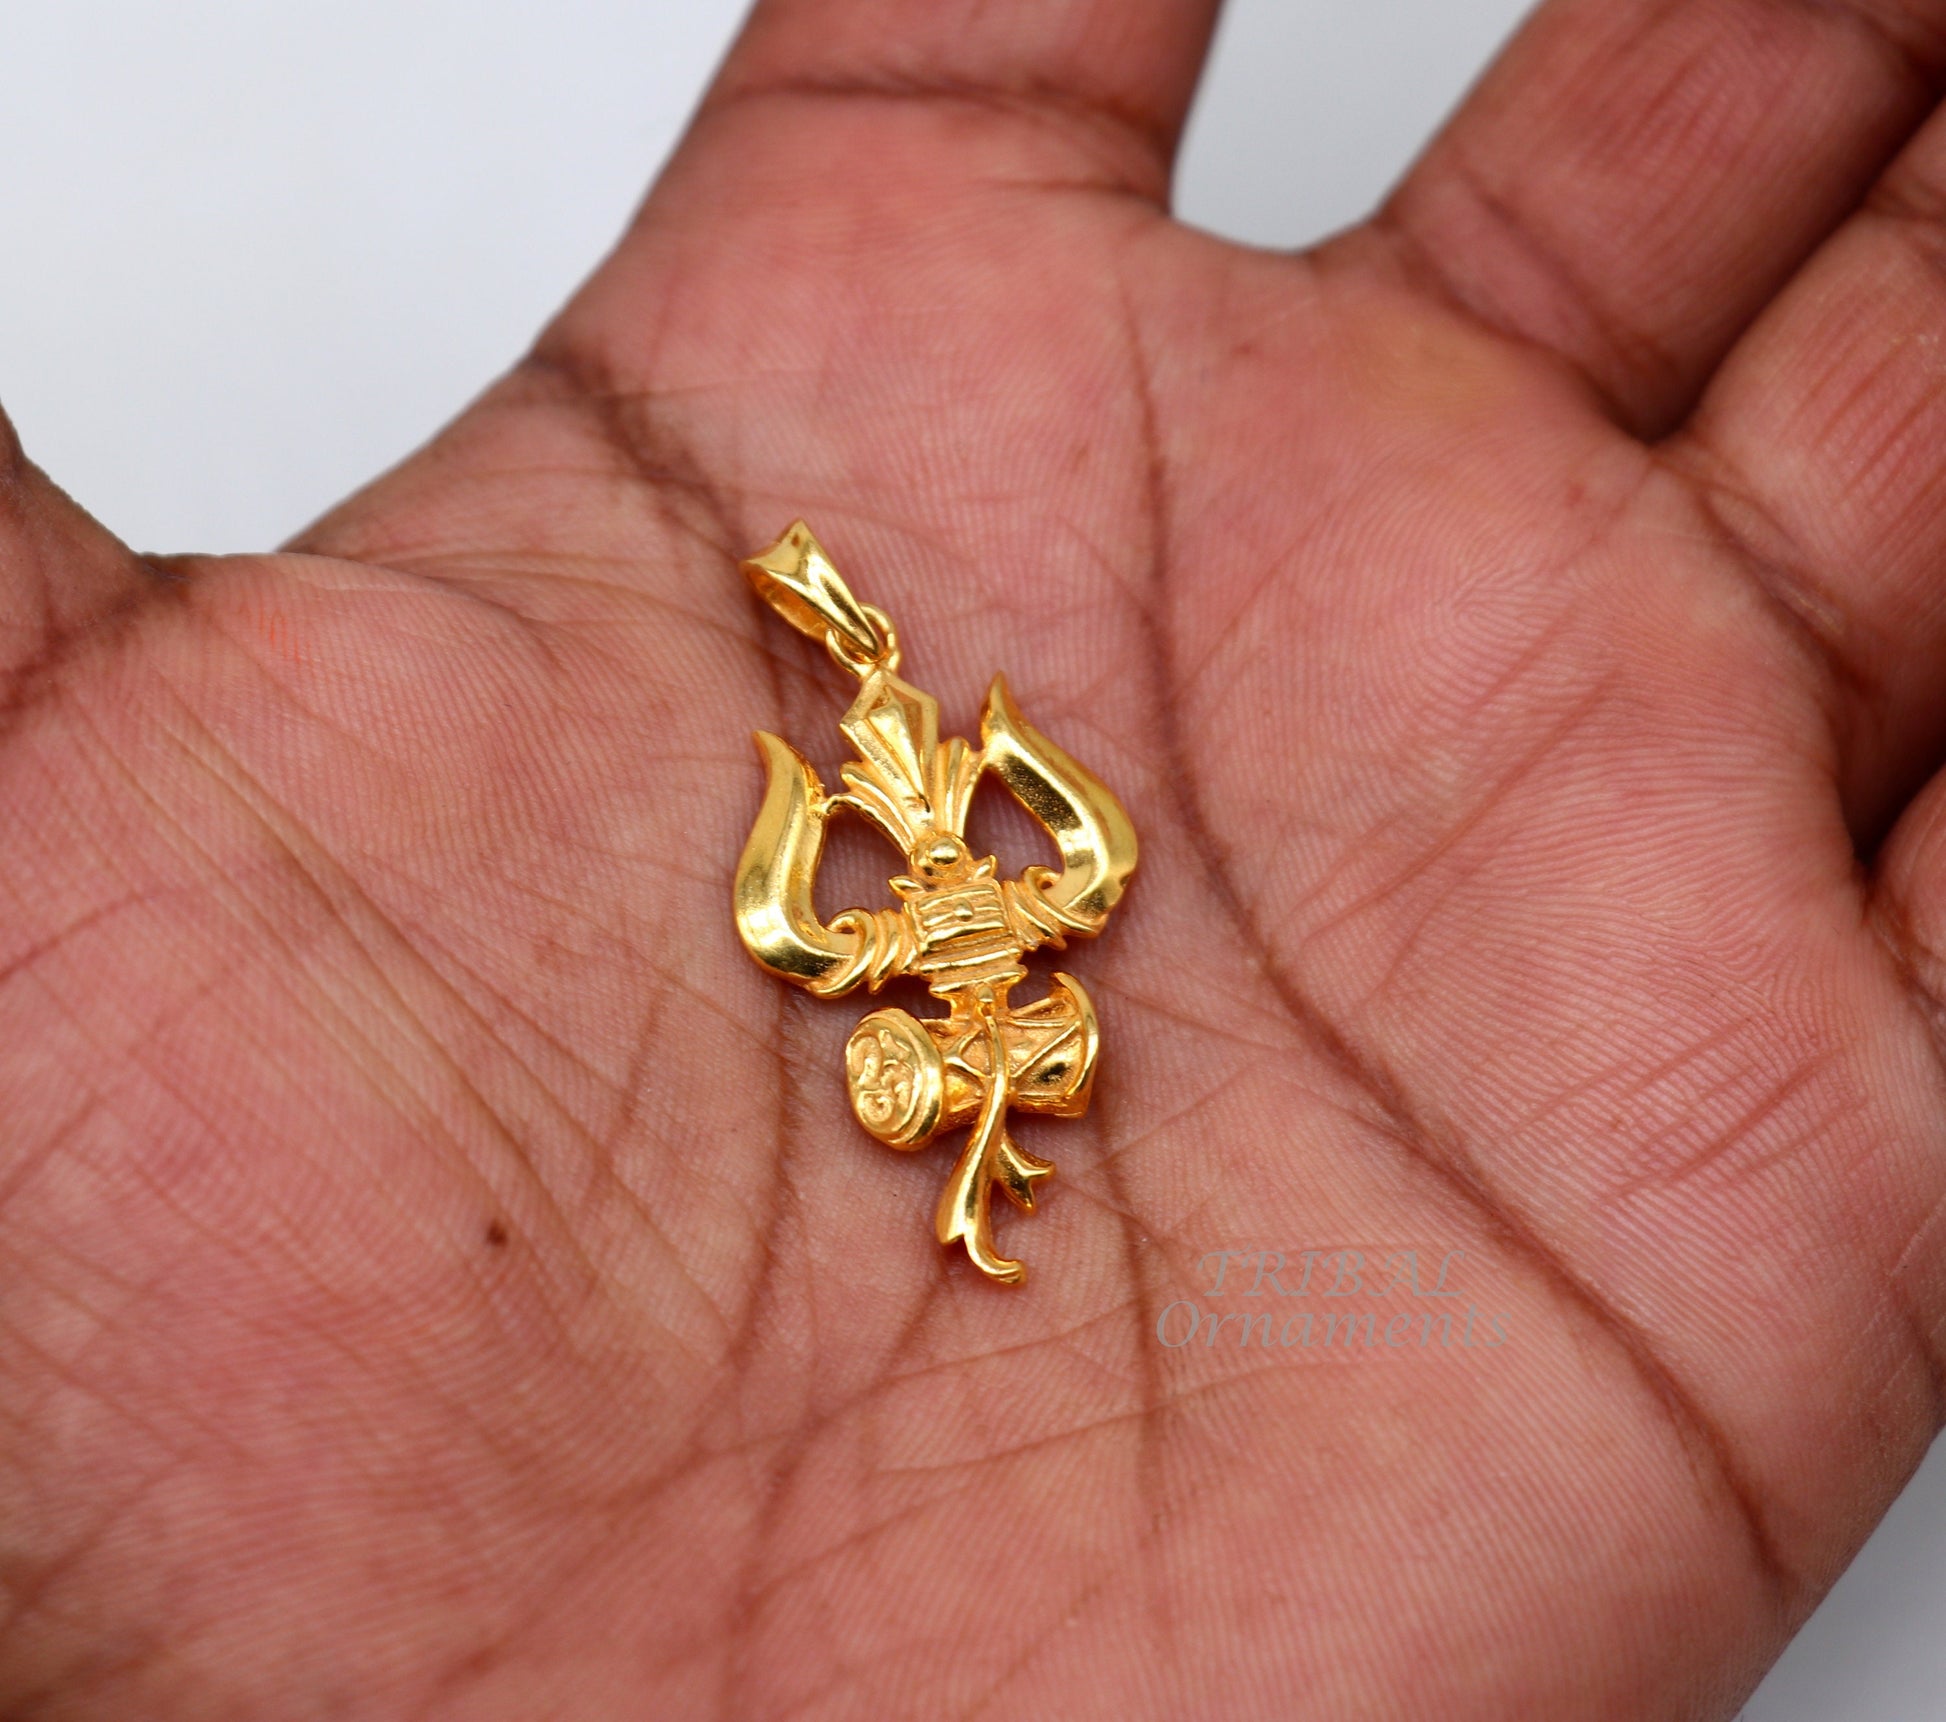 925 sterling silver Gold polished idol Lord Shiva trident pendant, amazing vintage design gifting pendant customized god jewelry ssp541 - TRIBAL ORNAMENTS